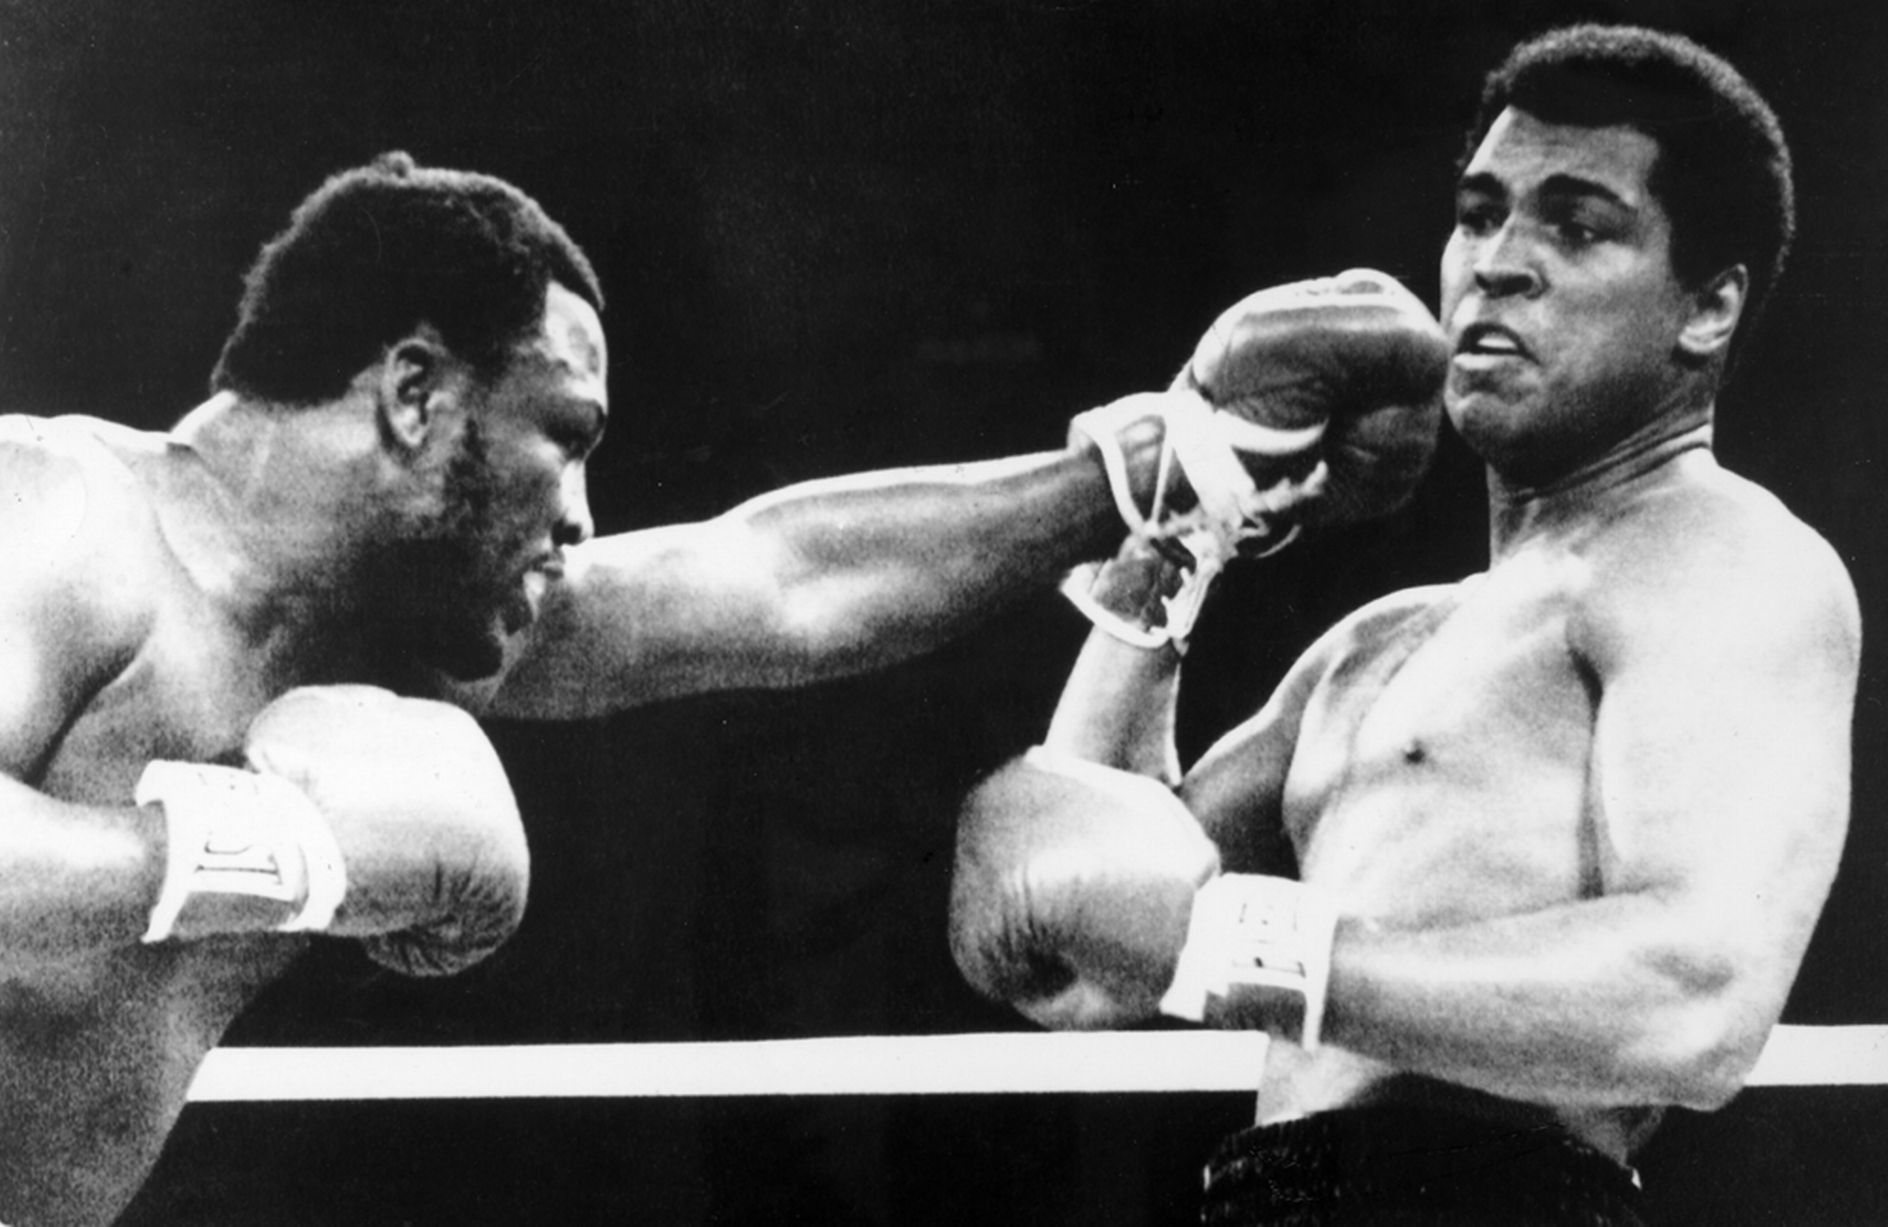 How Well Do You Know the Year 1975? Thrilla In Manila